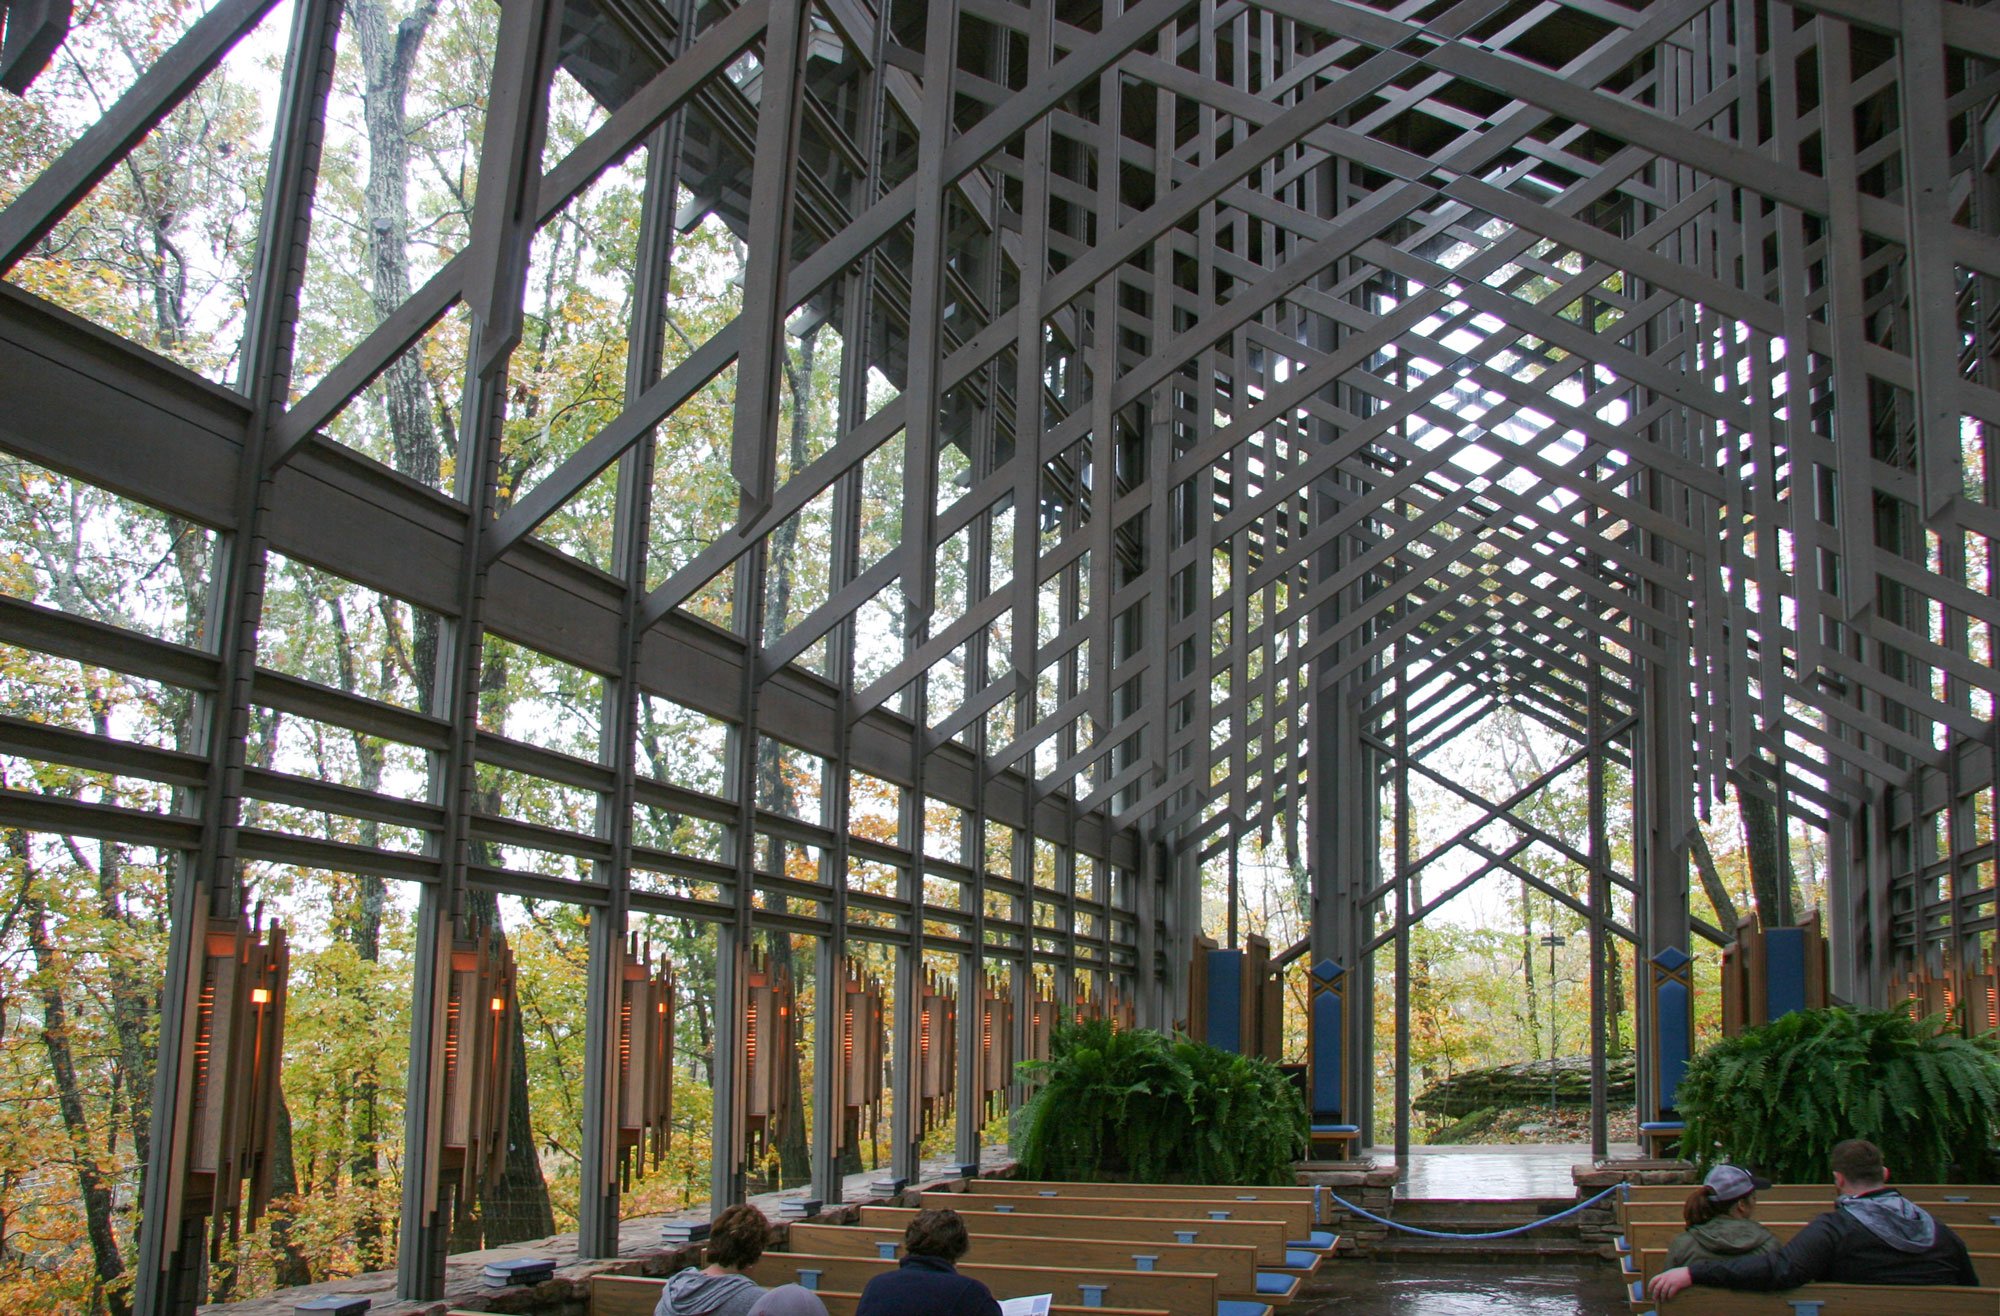 thorncrown chapel interior in daylight